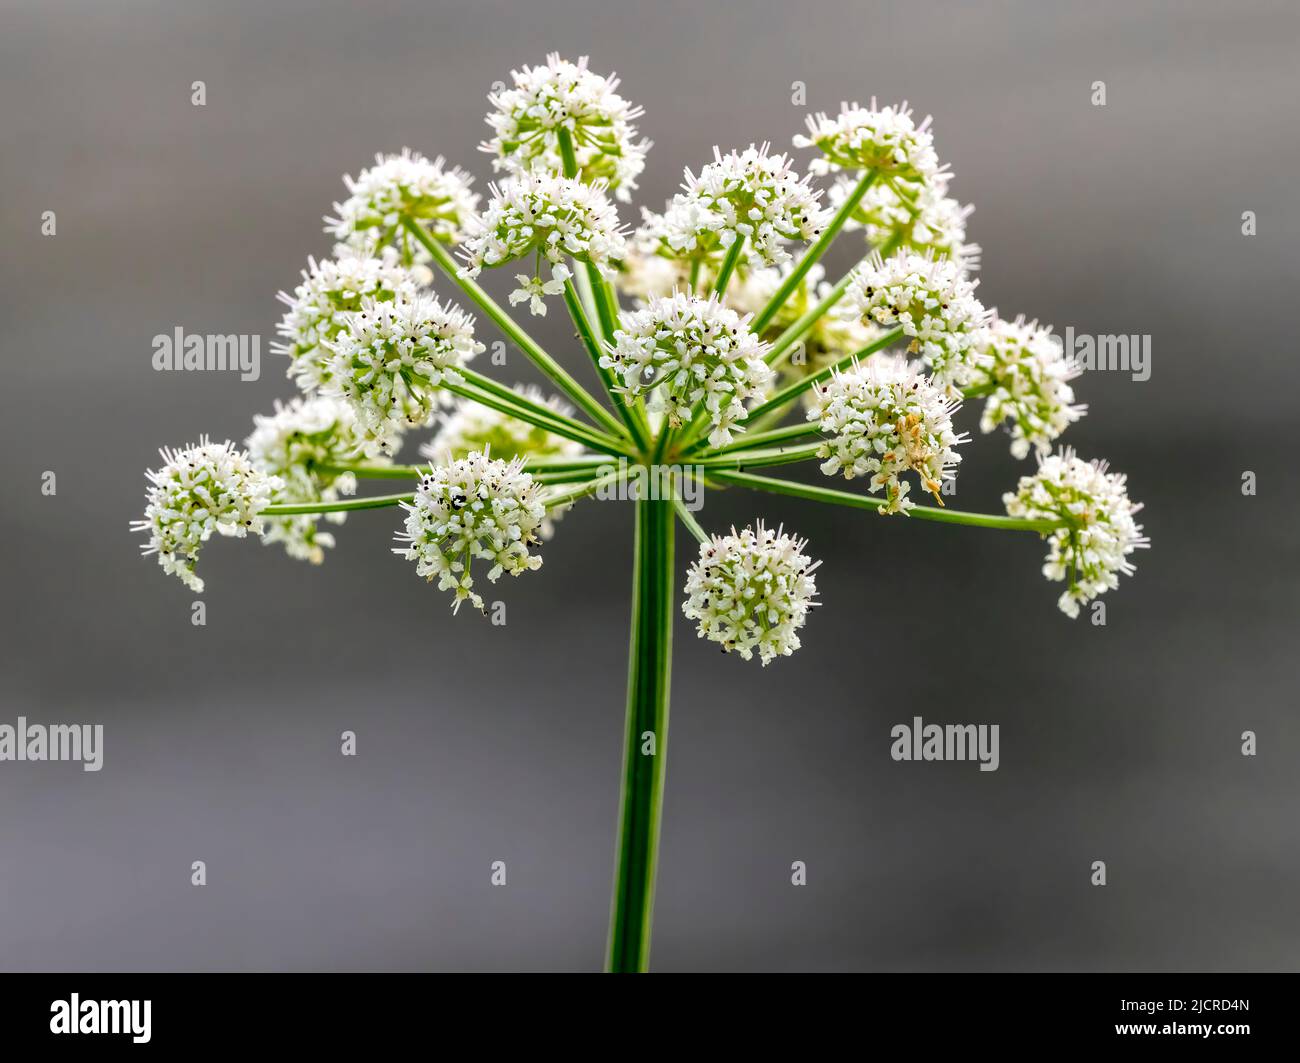 A flower head of Cow Parsley (Anthriscus sylvestris), photographed against an out of focus background Stock Photo